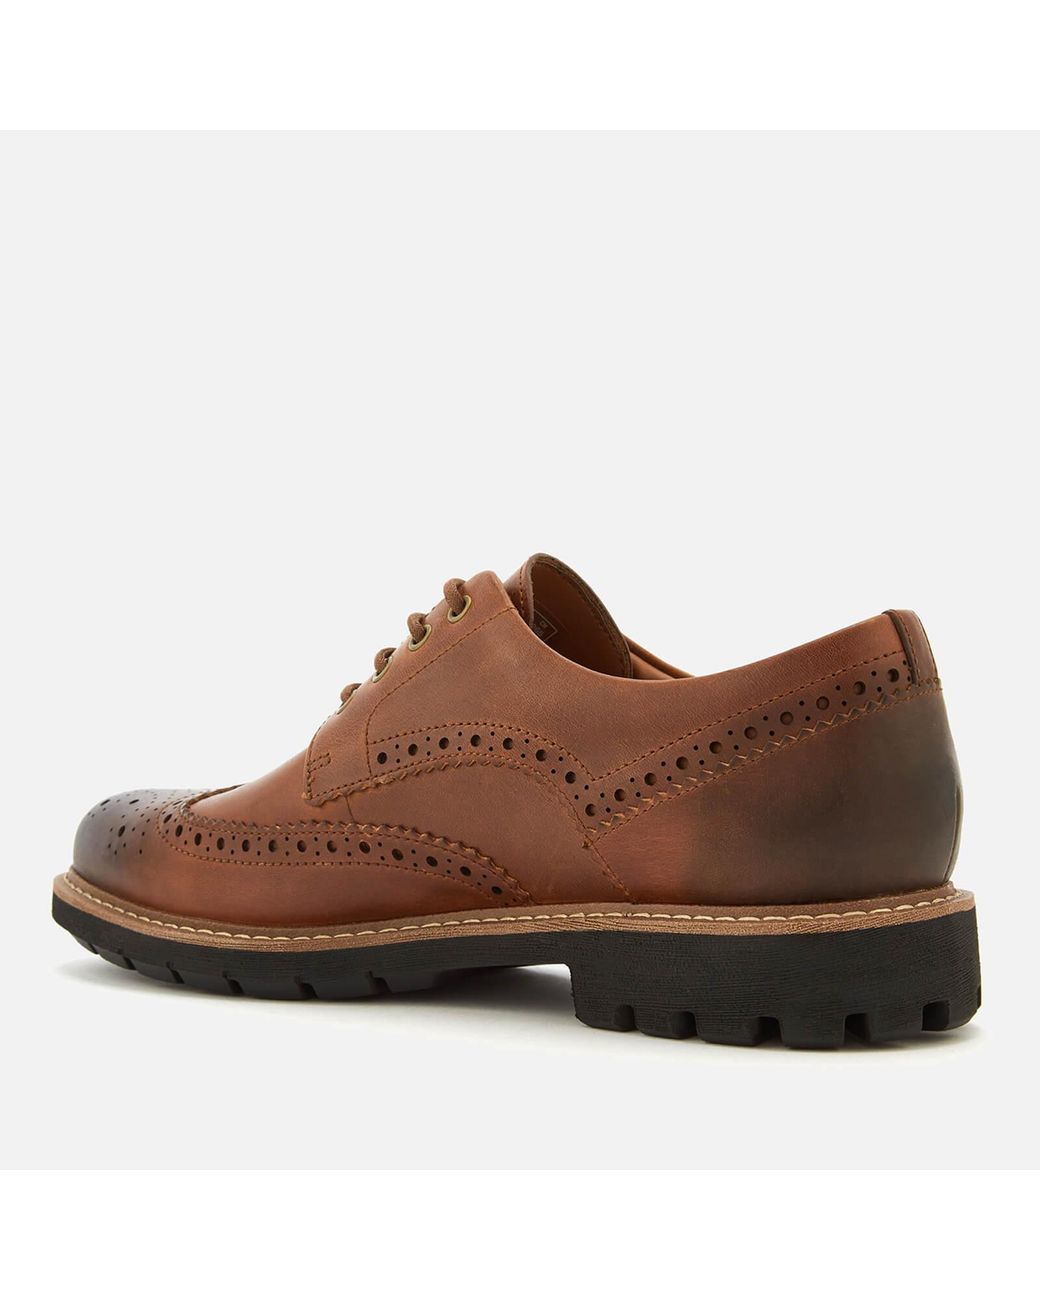 Clarks Batcombe Wing Leather Brogues in Tan (Brown) for Men | Lyst